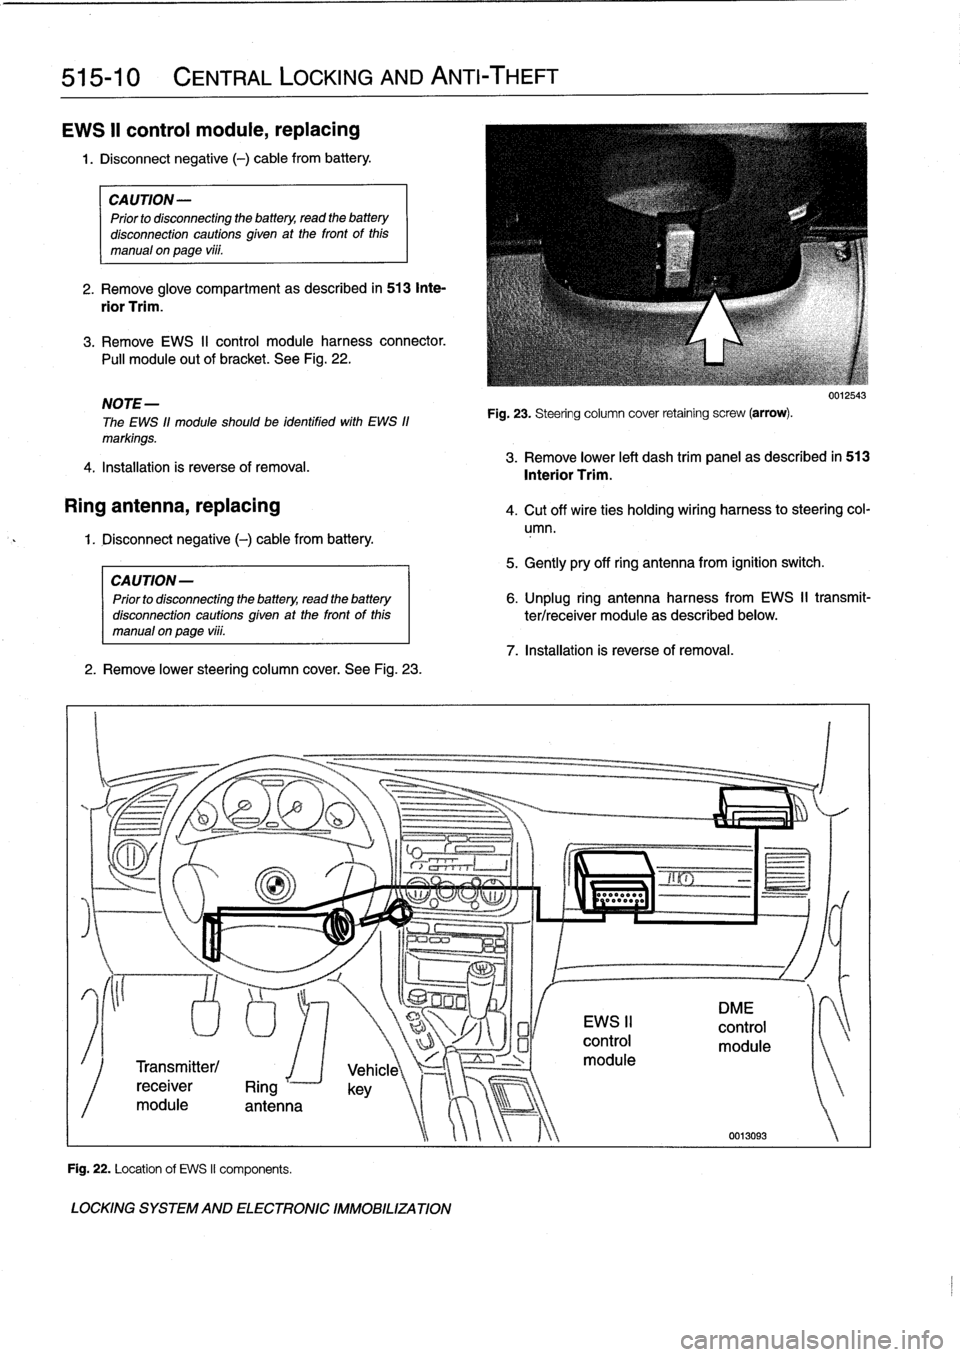 BMW 318i 1997 E36 Workshop Manual 
515-10

	

CENTRAL
LOCKING
AND
ANTI-THEFT

EWS
II
control
module,
replacing

1
.
Disconnect
negative
(-)
cable
from
battery
.

CAUTION-

Prior
to
disconnecting
the
battery,
read
the
battery

disconne